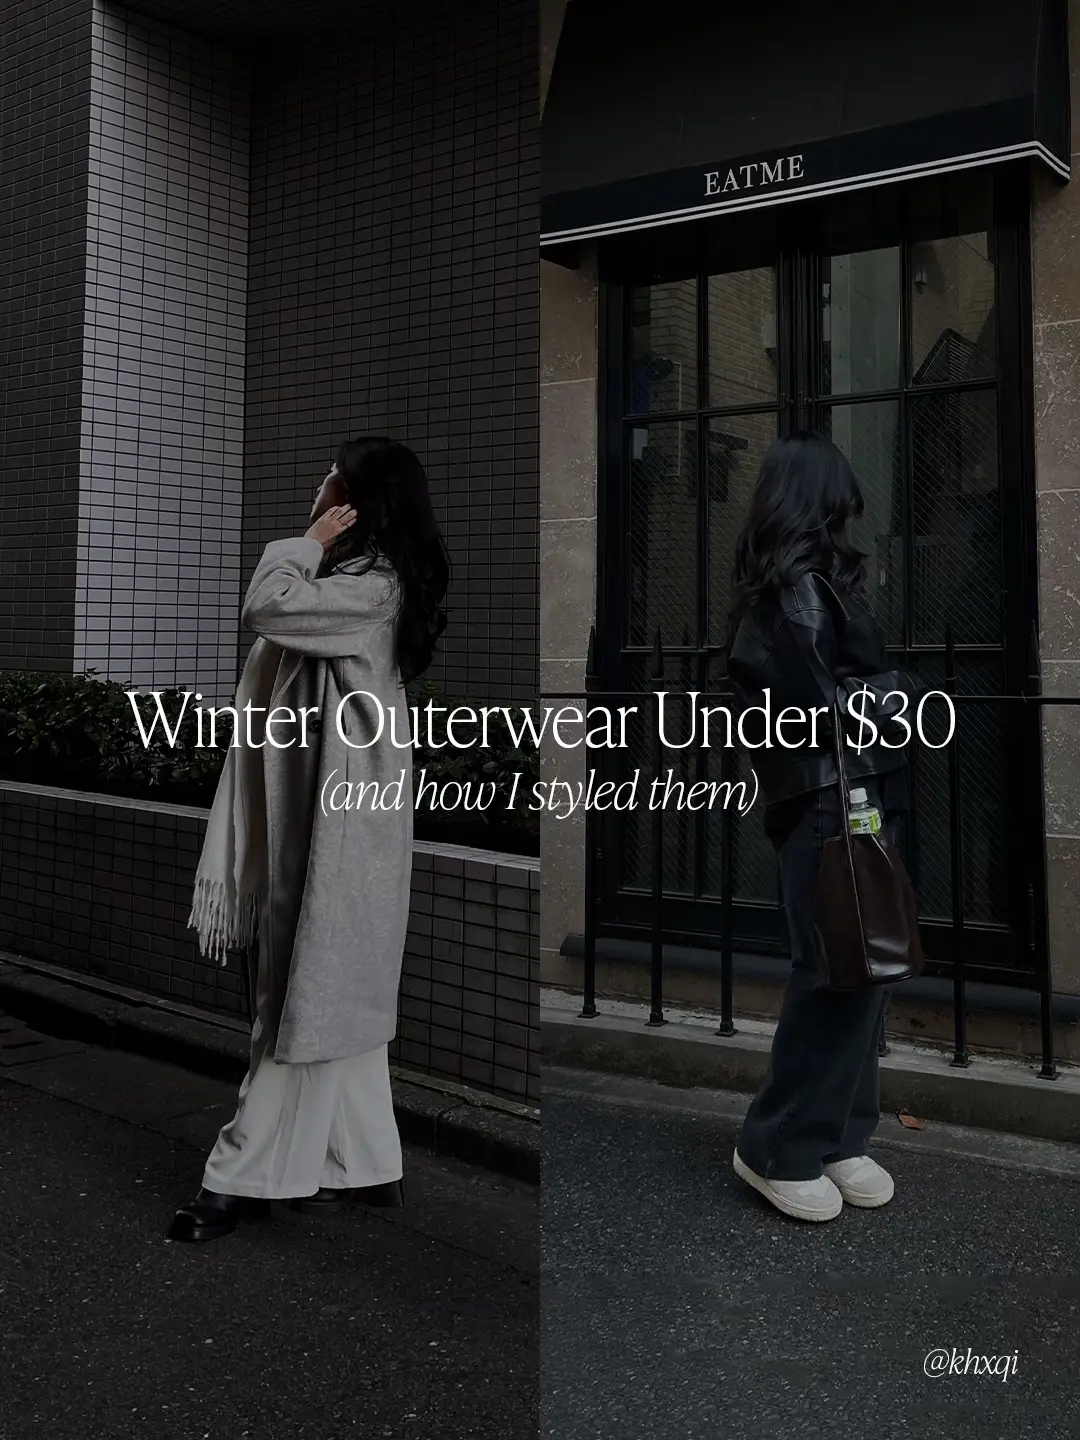 winter outerwear under $35 + outfit ideas ☃️'s images(0)